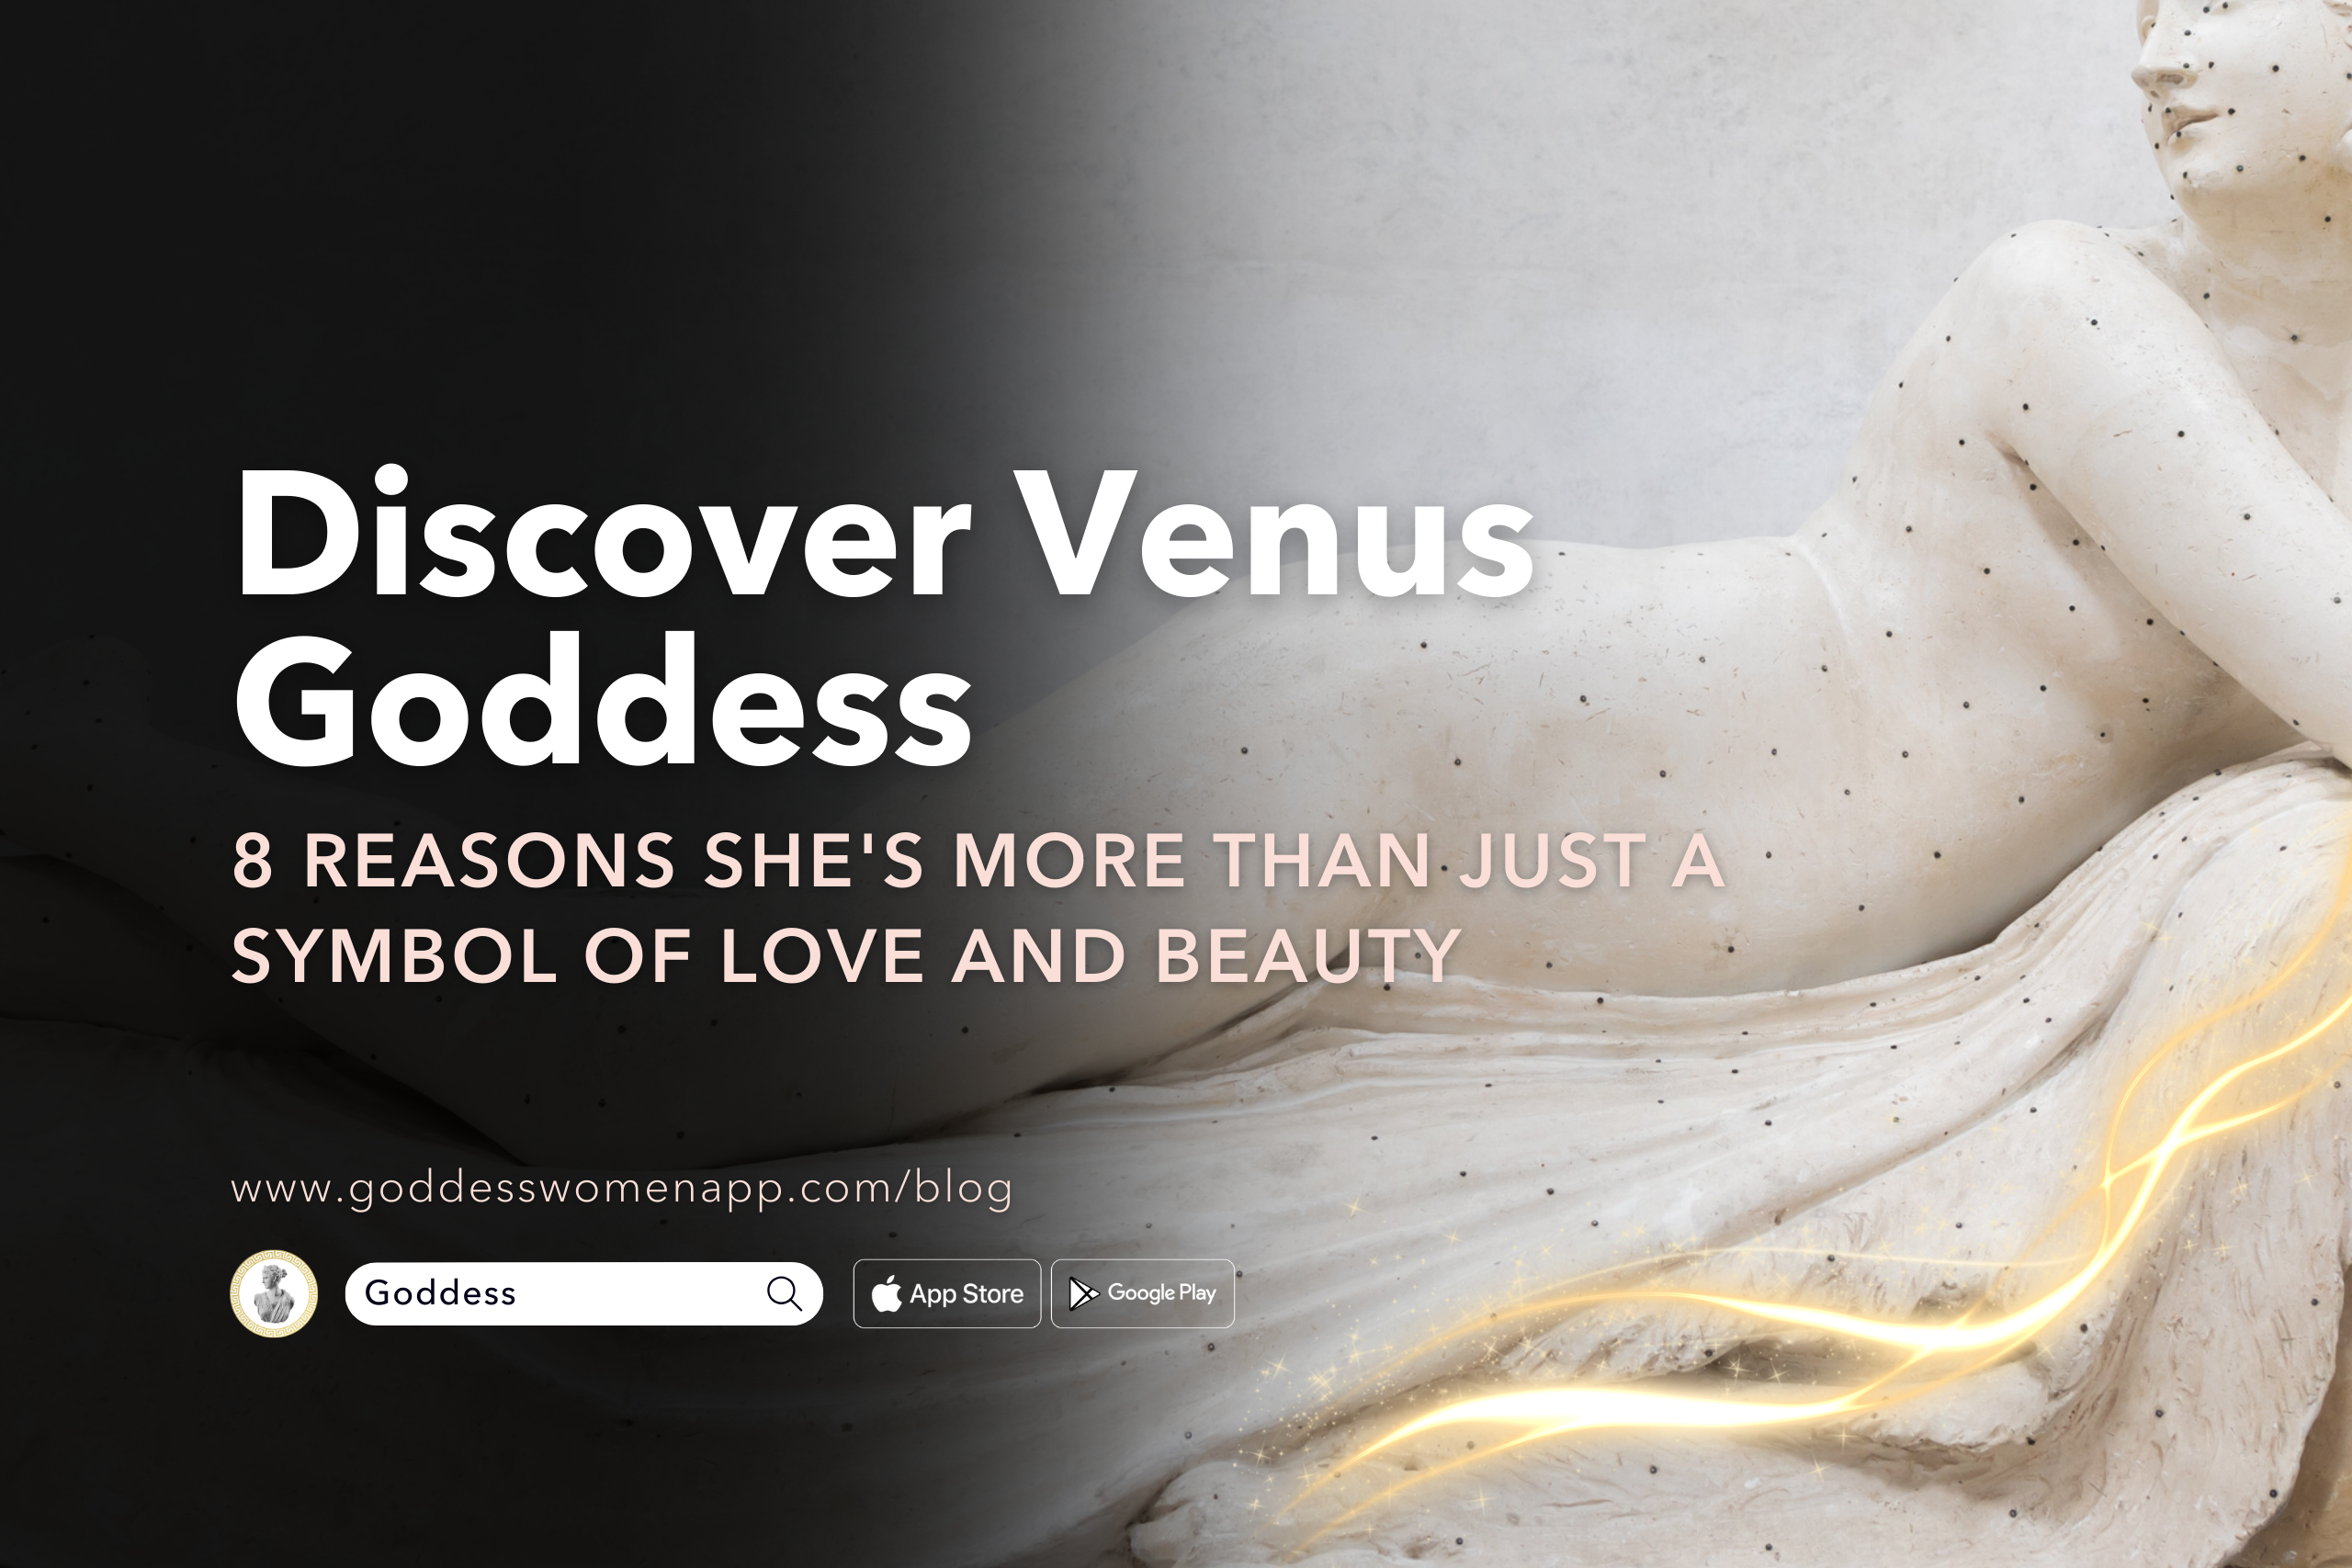 Discover Venus Goddess: 8 Reasons She’s More Than Just a Symbol of Love and Beauty